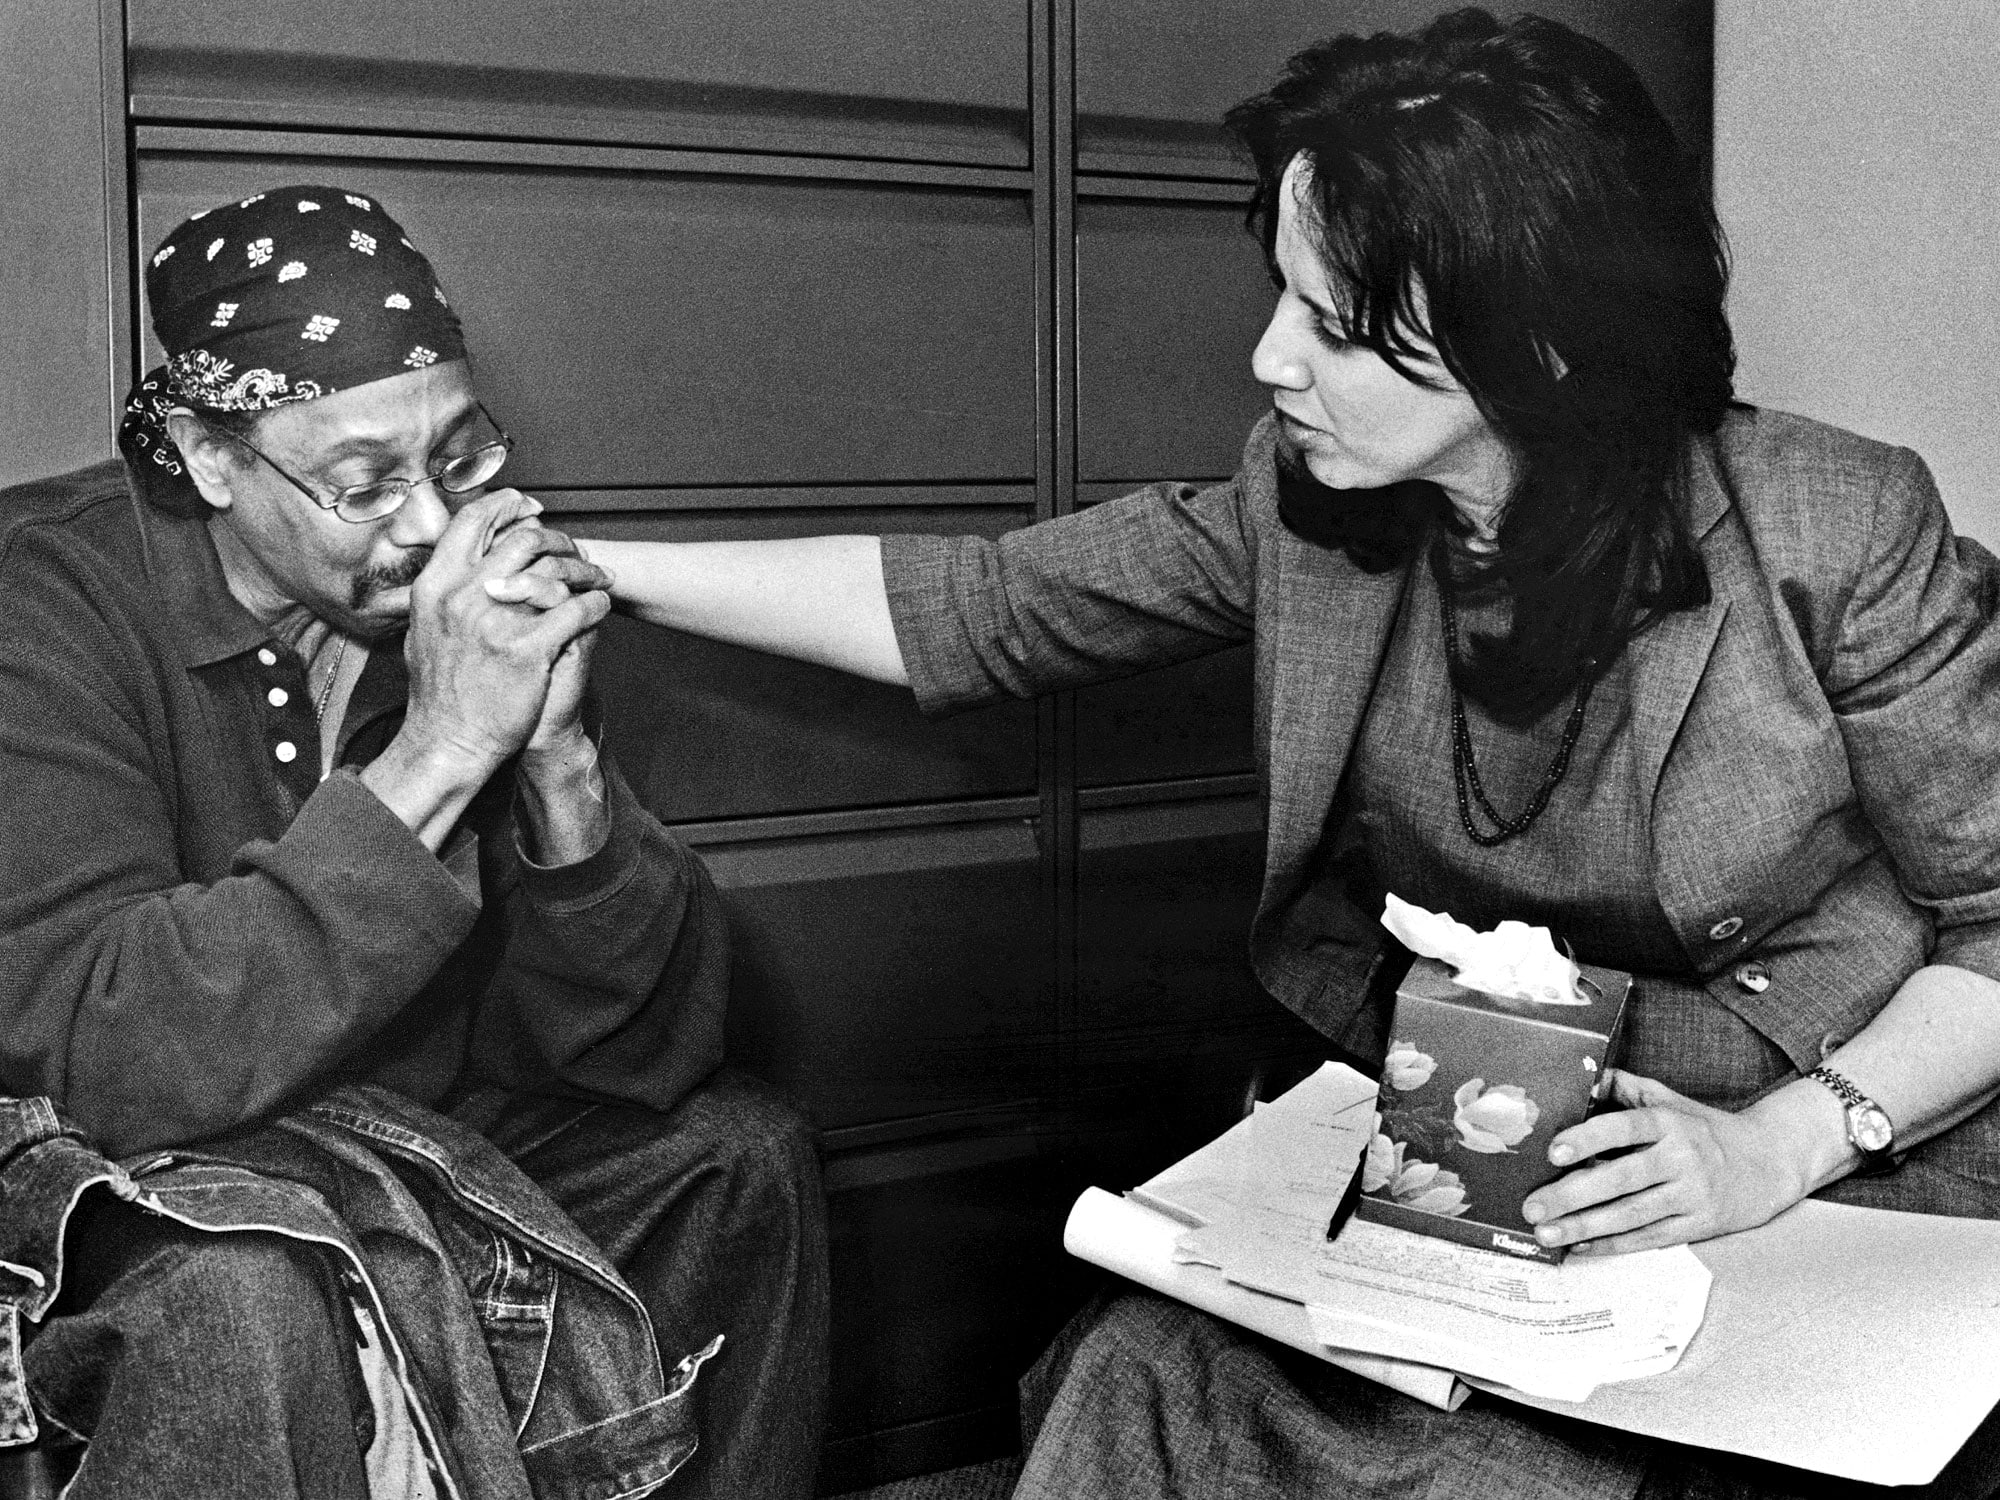 A woman placing a hand on a man's shoulder during a mental health screening.